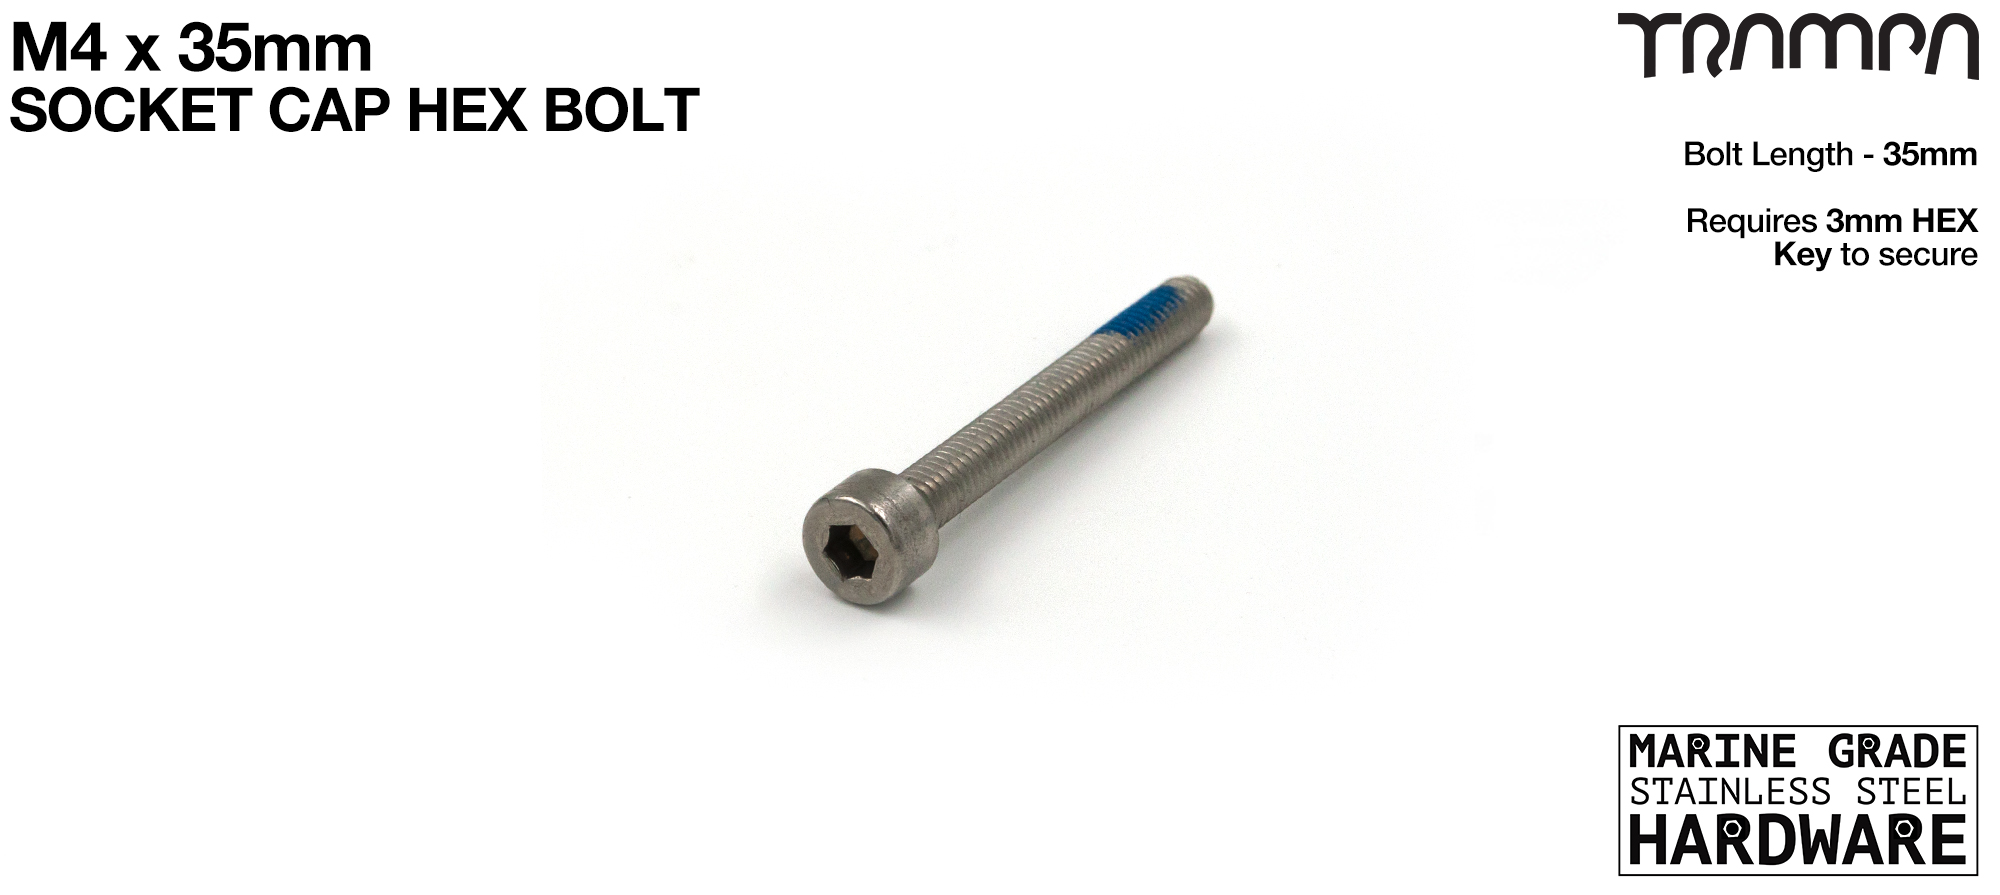 M4 x 35mm Socket Capped Allen-Key Bolt - Marine Grade Stainless steel with locking paste